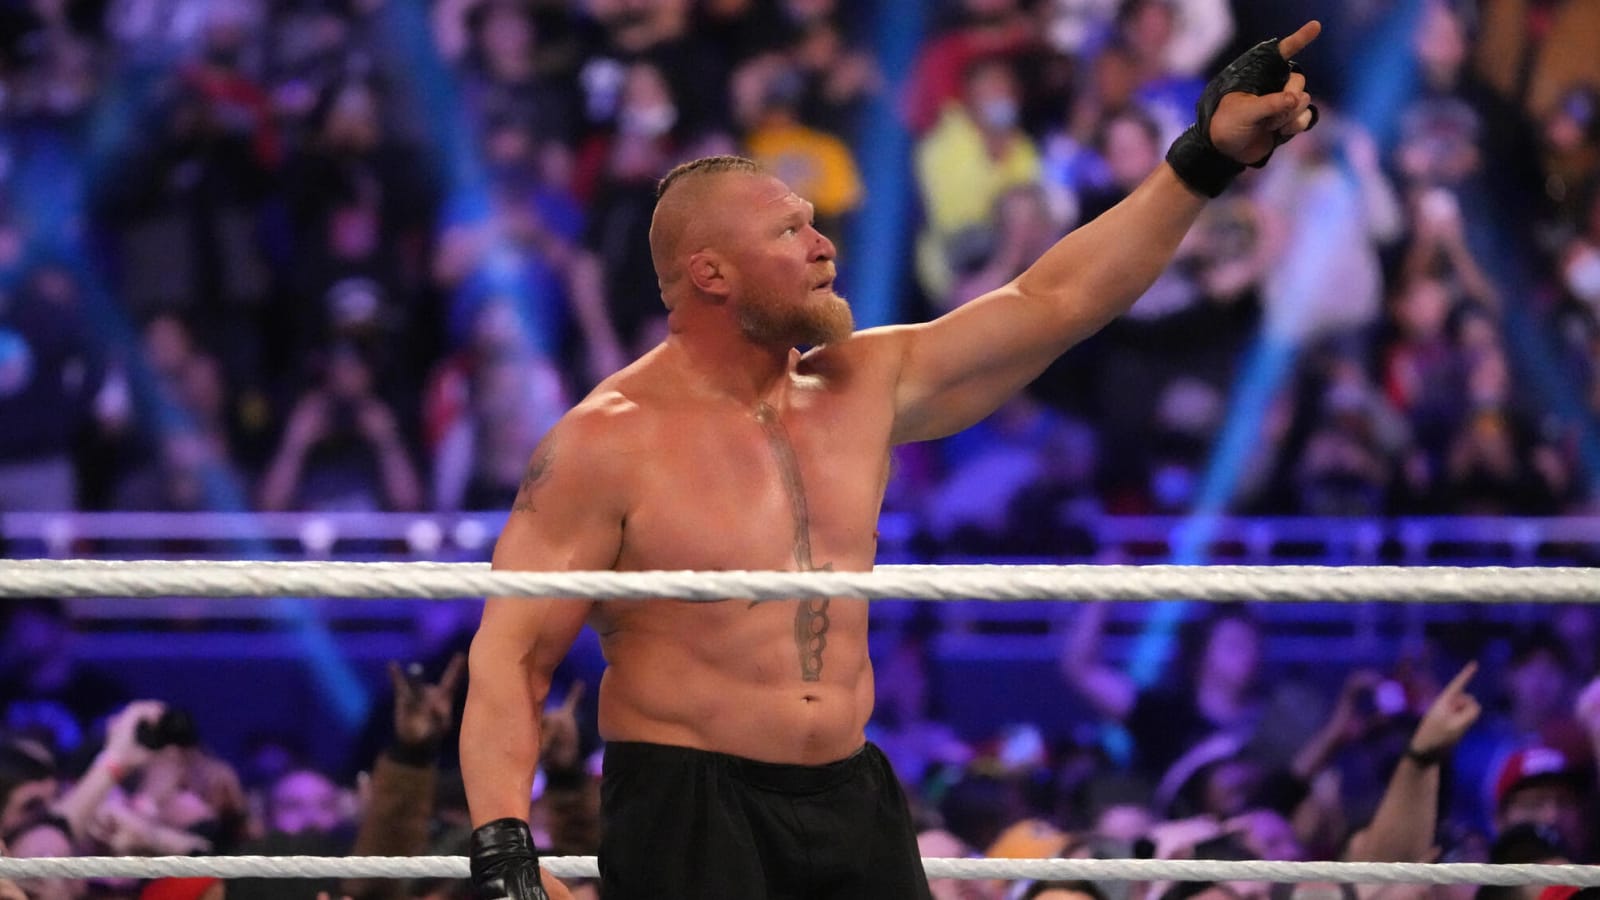 Brock Lesnar walks out of WWE SmackDown following Vince McMahon retirement